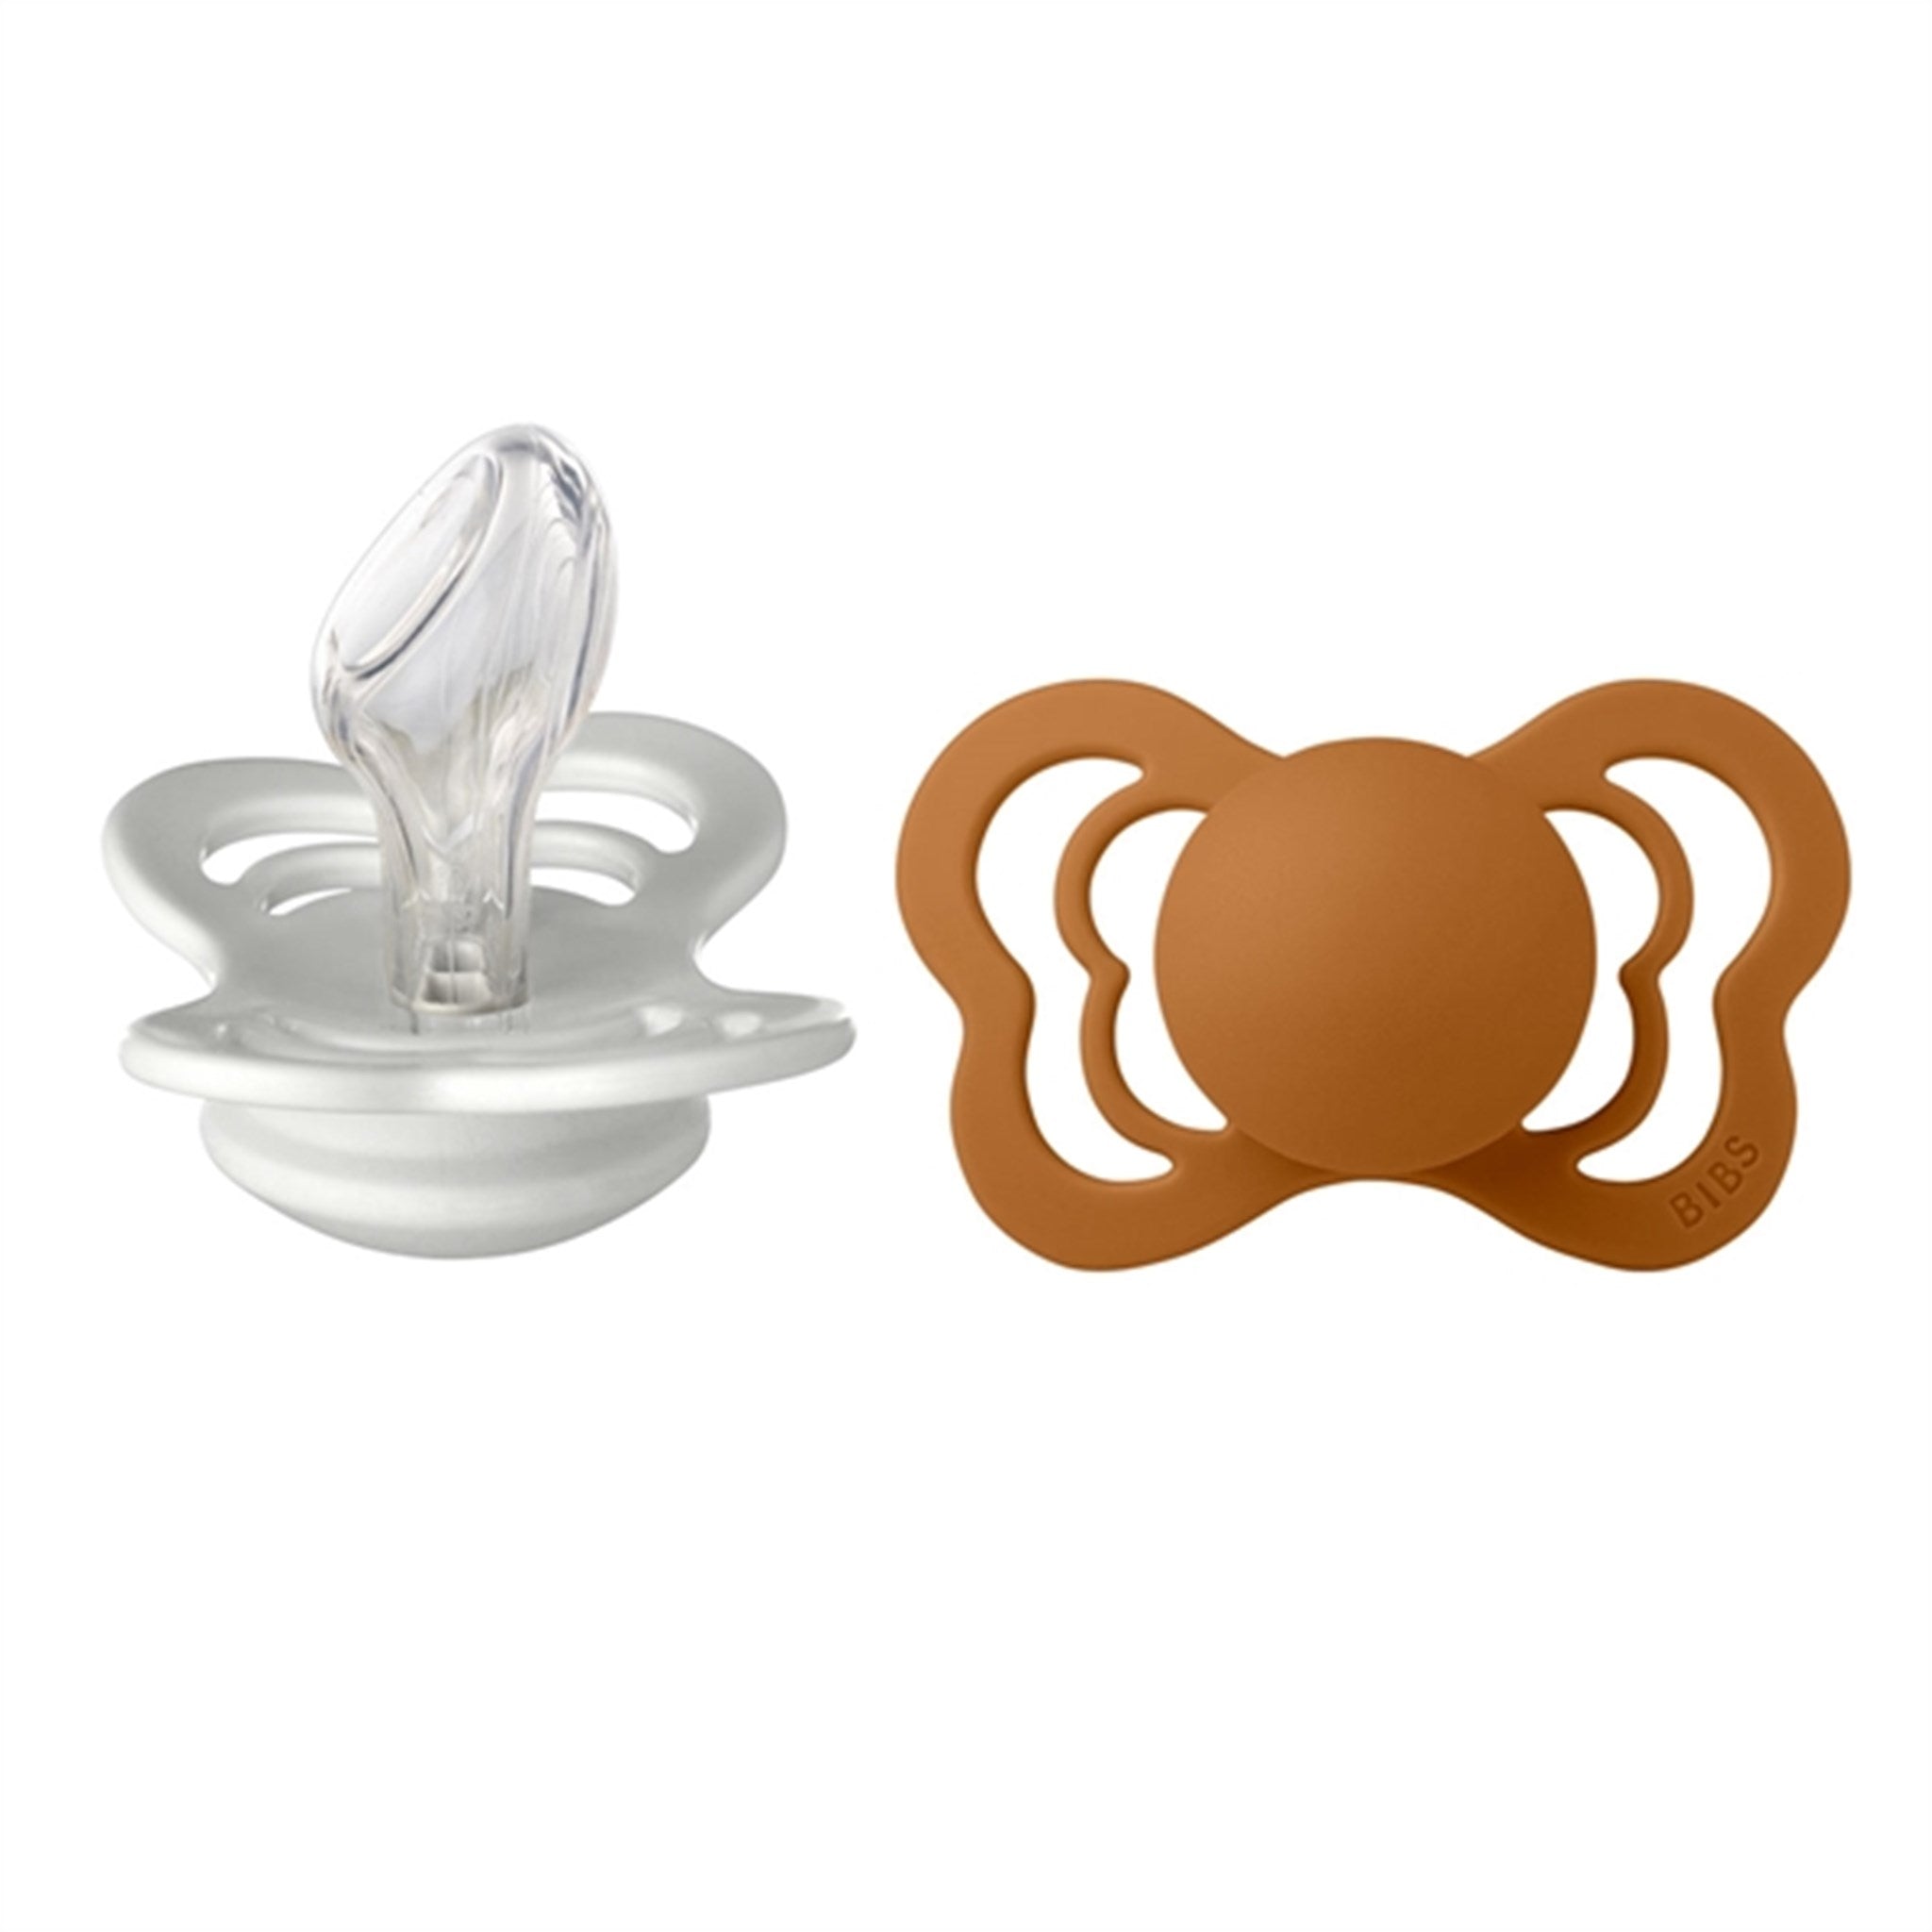 Bibs Couture Silicone Pacifiers 2-pack Anatomical Haze/Caramel 2